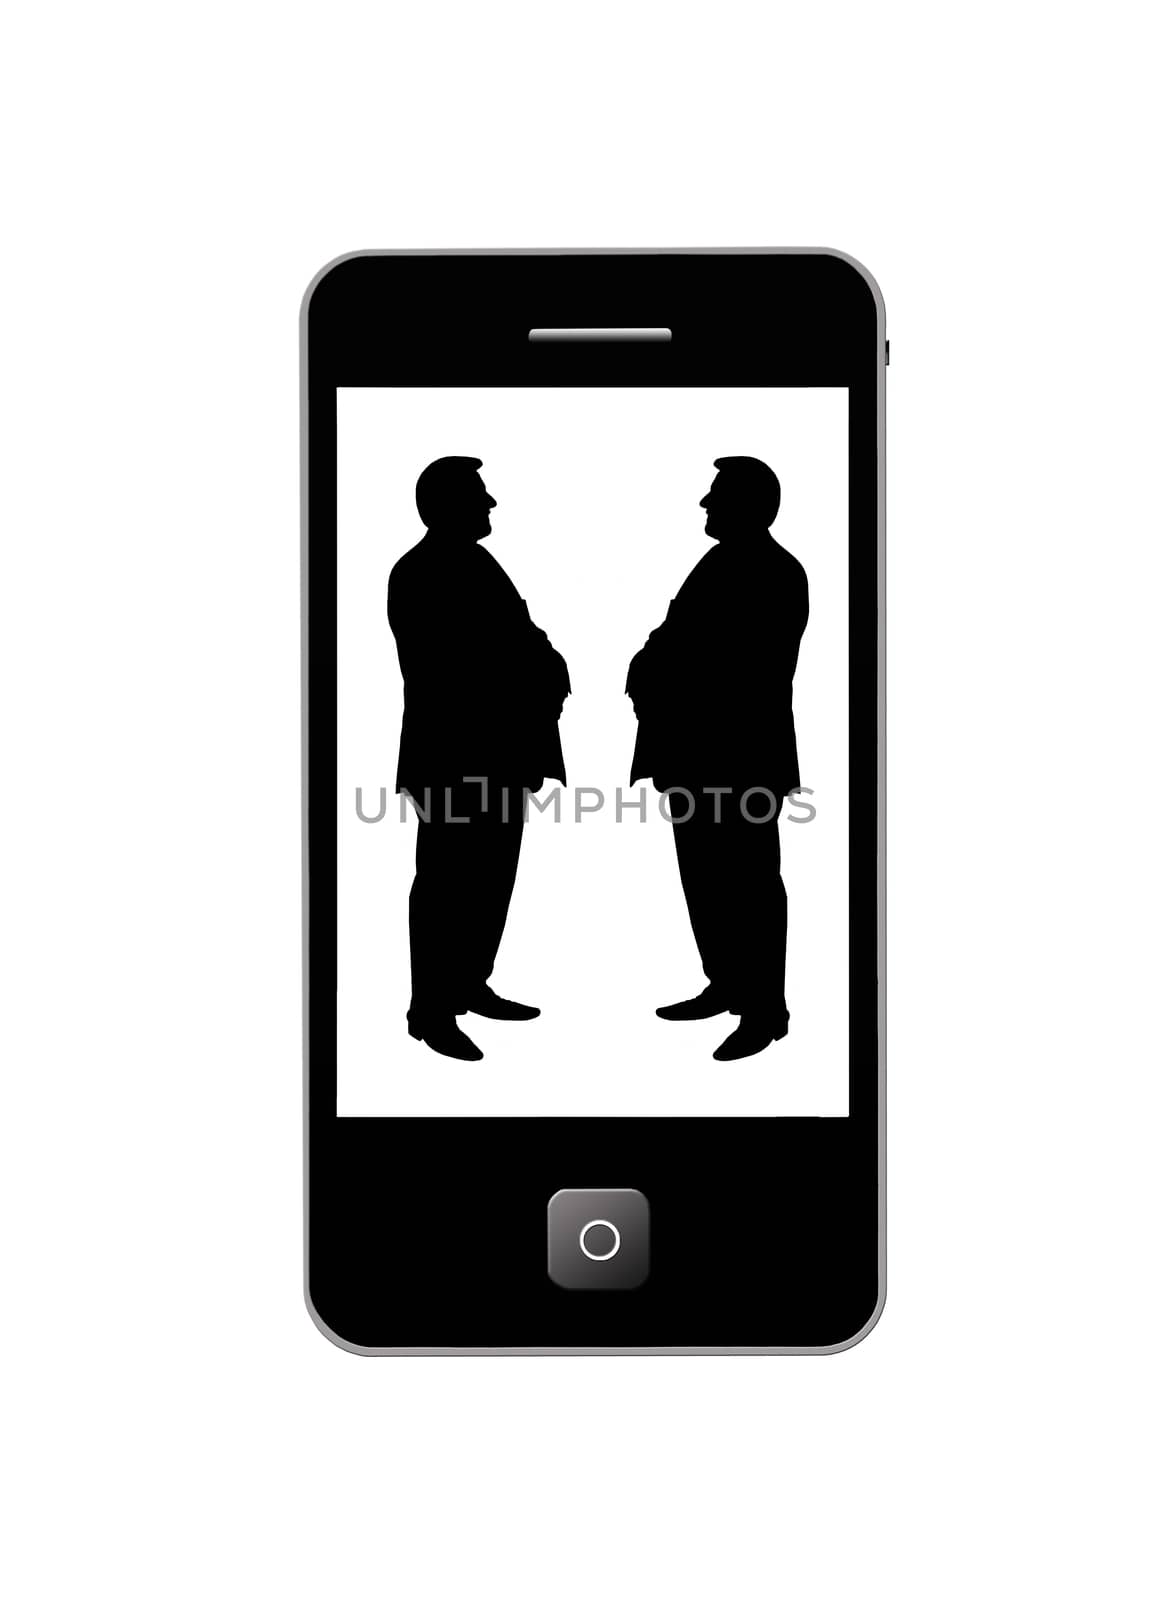 modern mobile phone with two black silhouettes of men